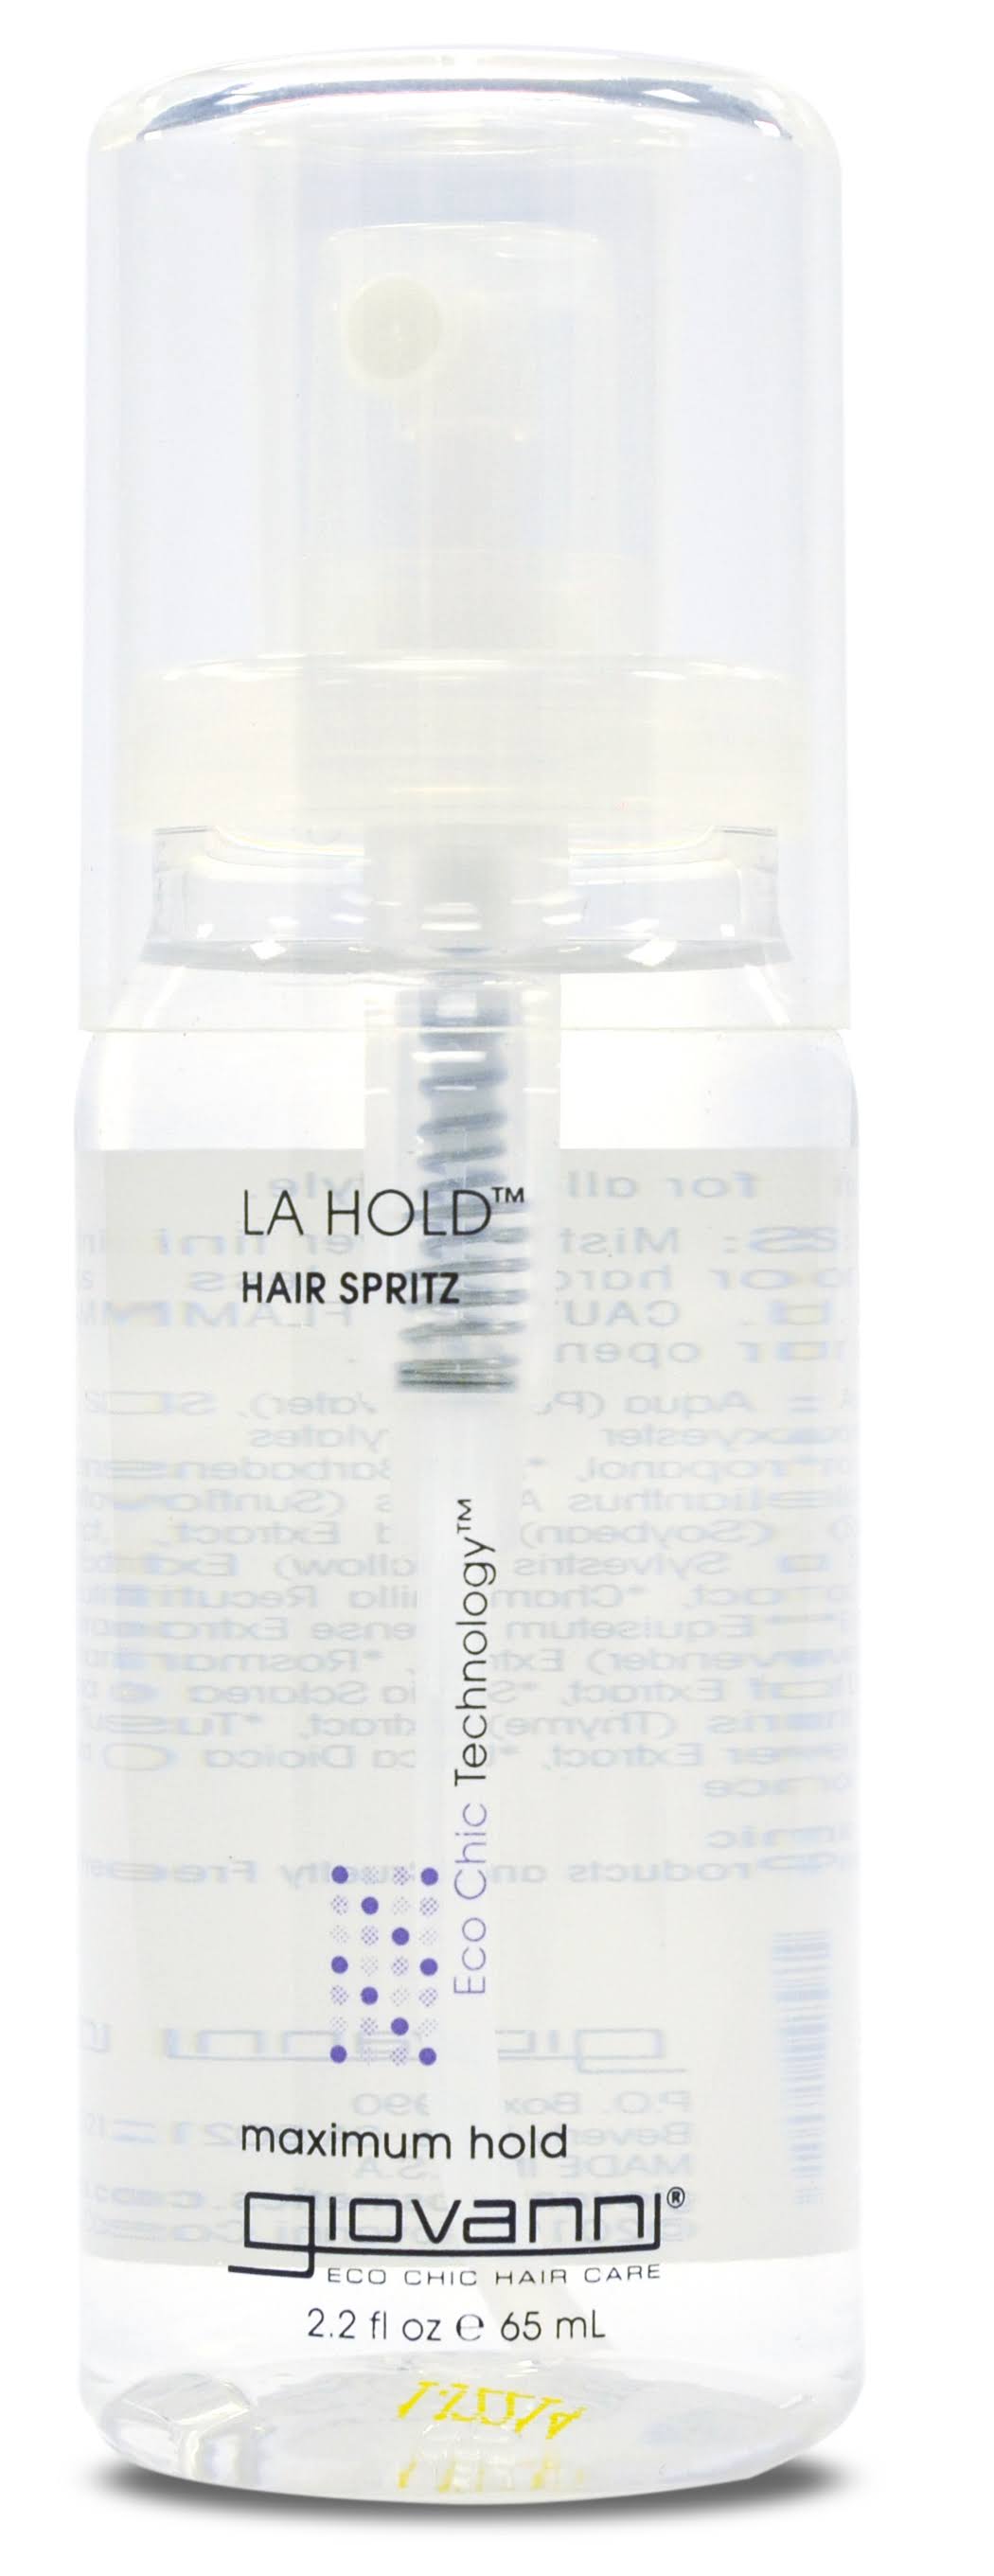 Giovanni L.A. Hold Hair Styling Spritz - 147ml